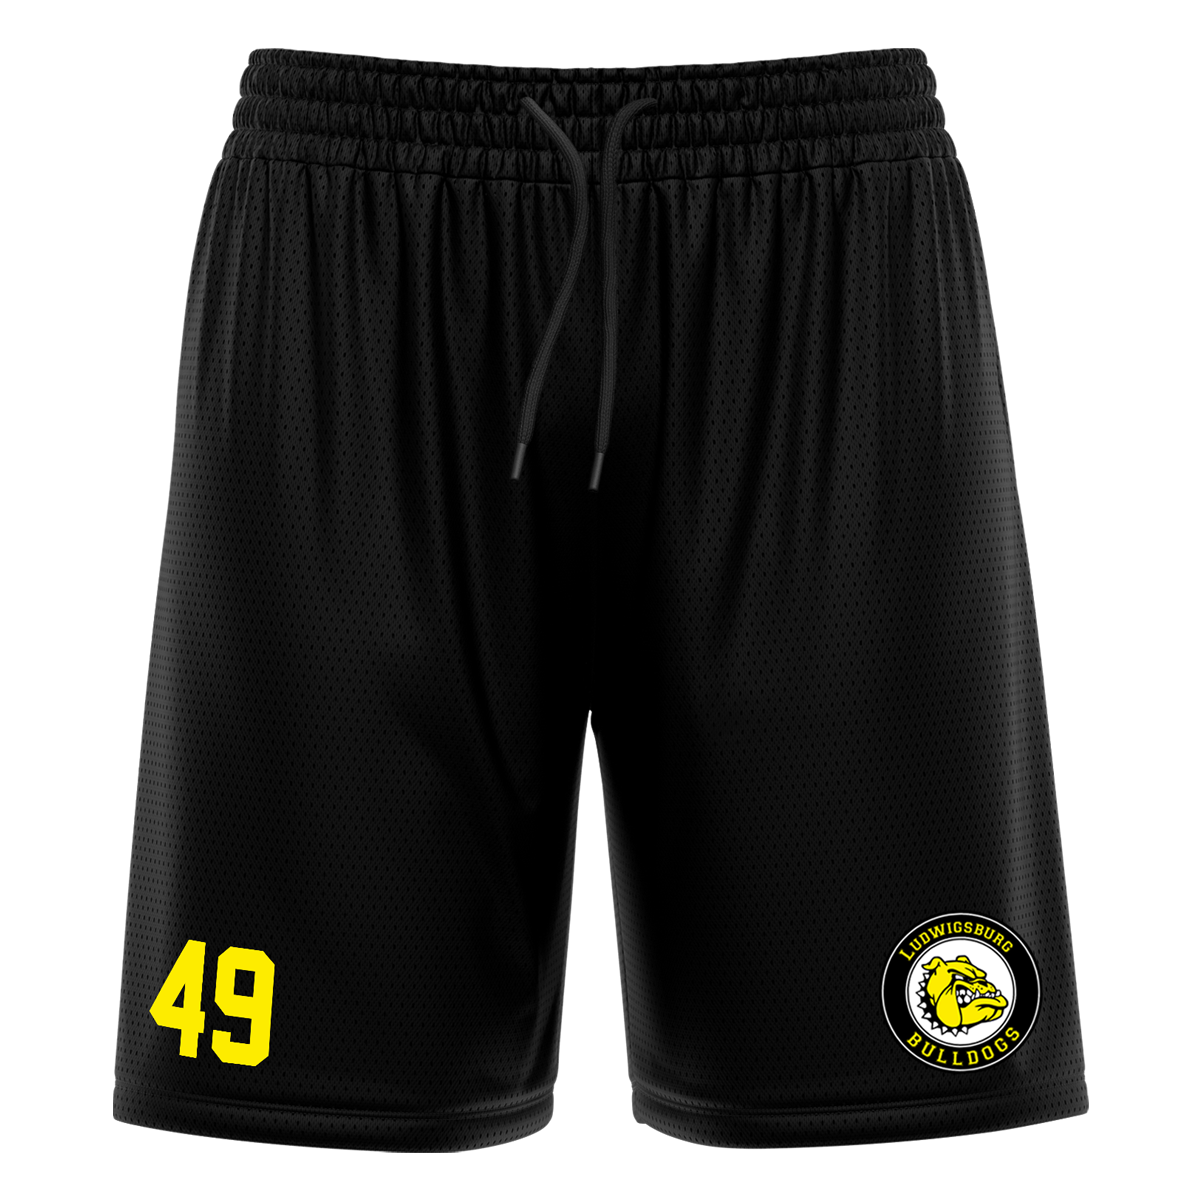 LB-Bulldogs Athletic Mesh-Short with Playernumber/Initials